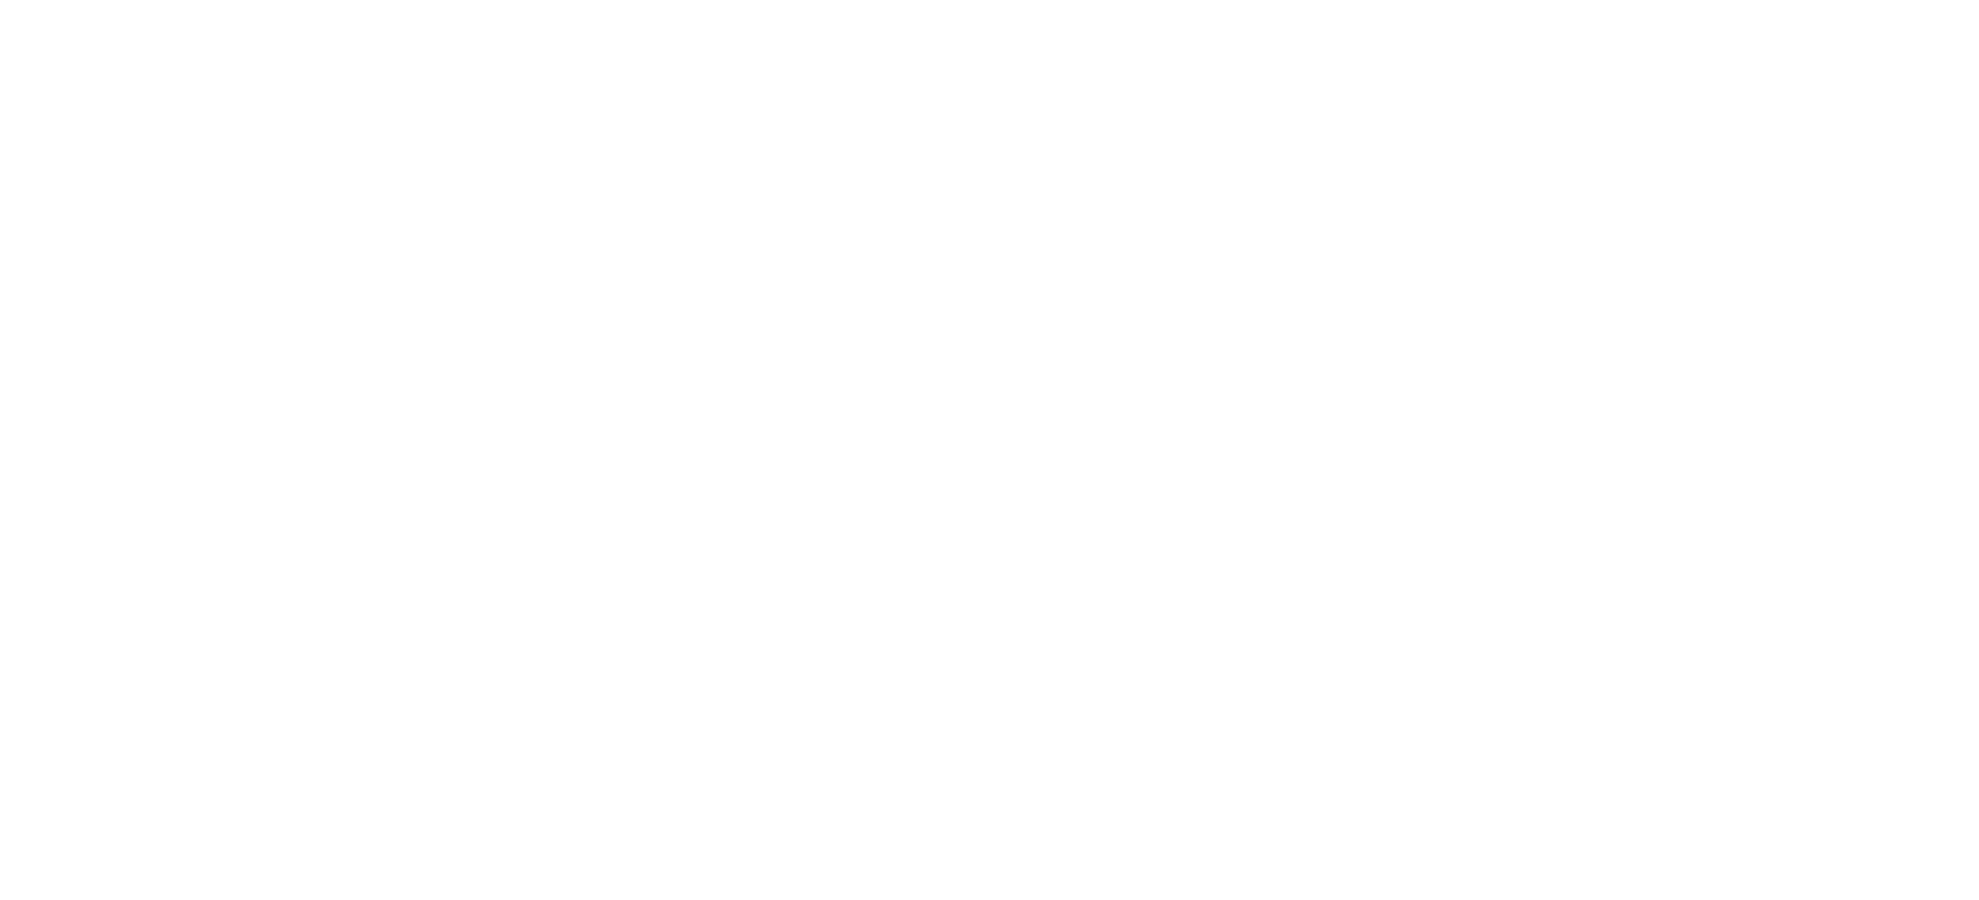 Geneseo Chamber of Commerce